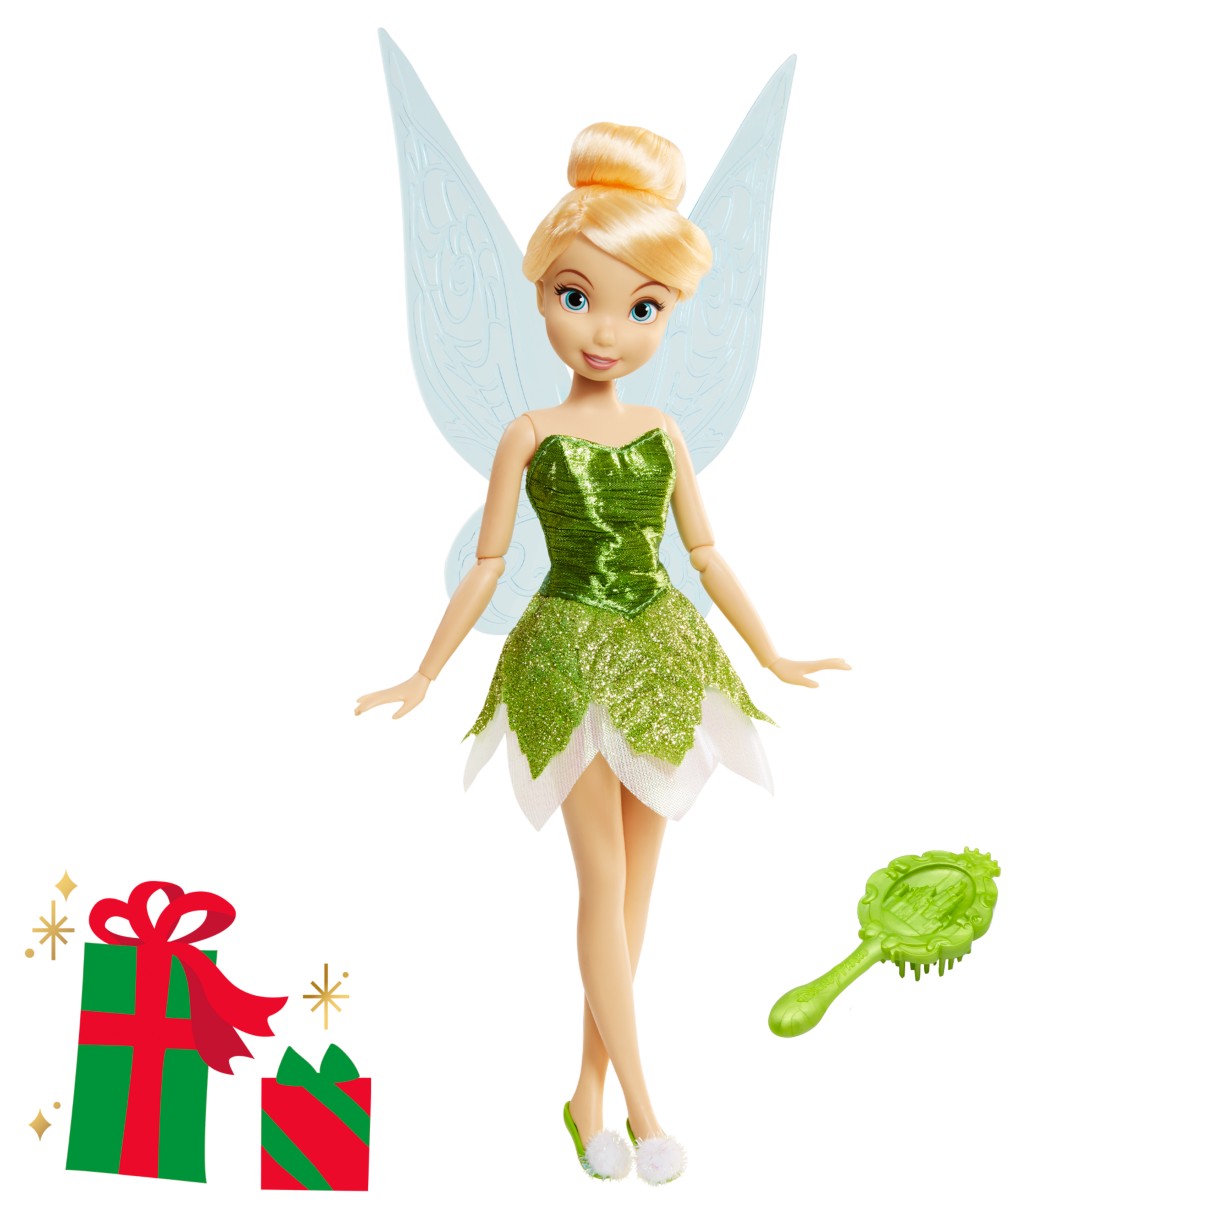 Tinker Bell Classic Doll – Peter Pan – Toys for Tots Donation Item